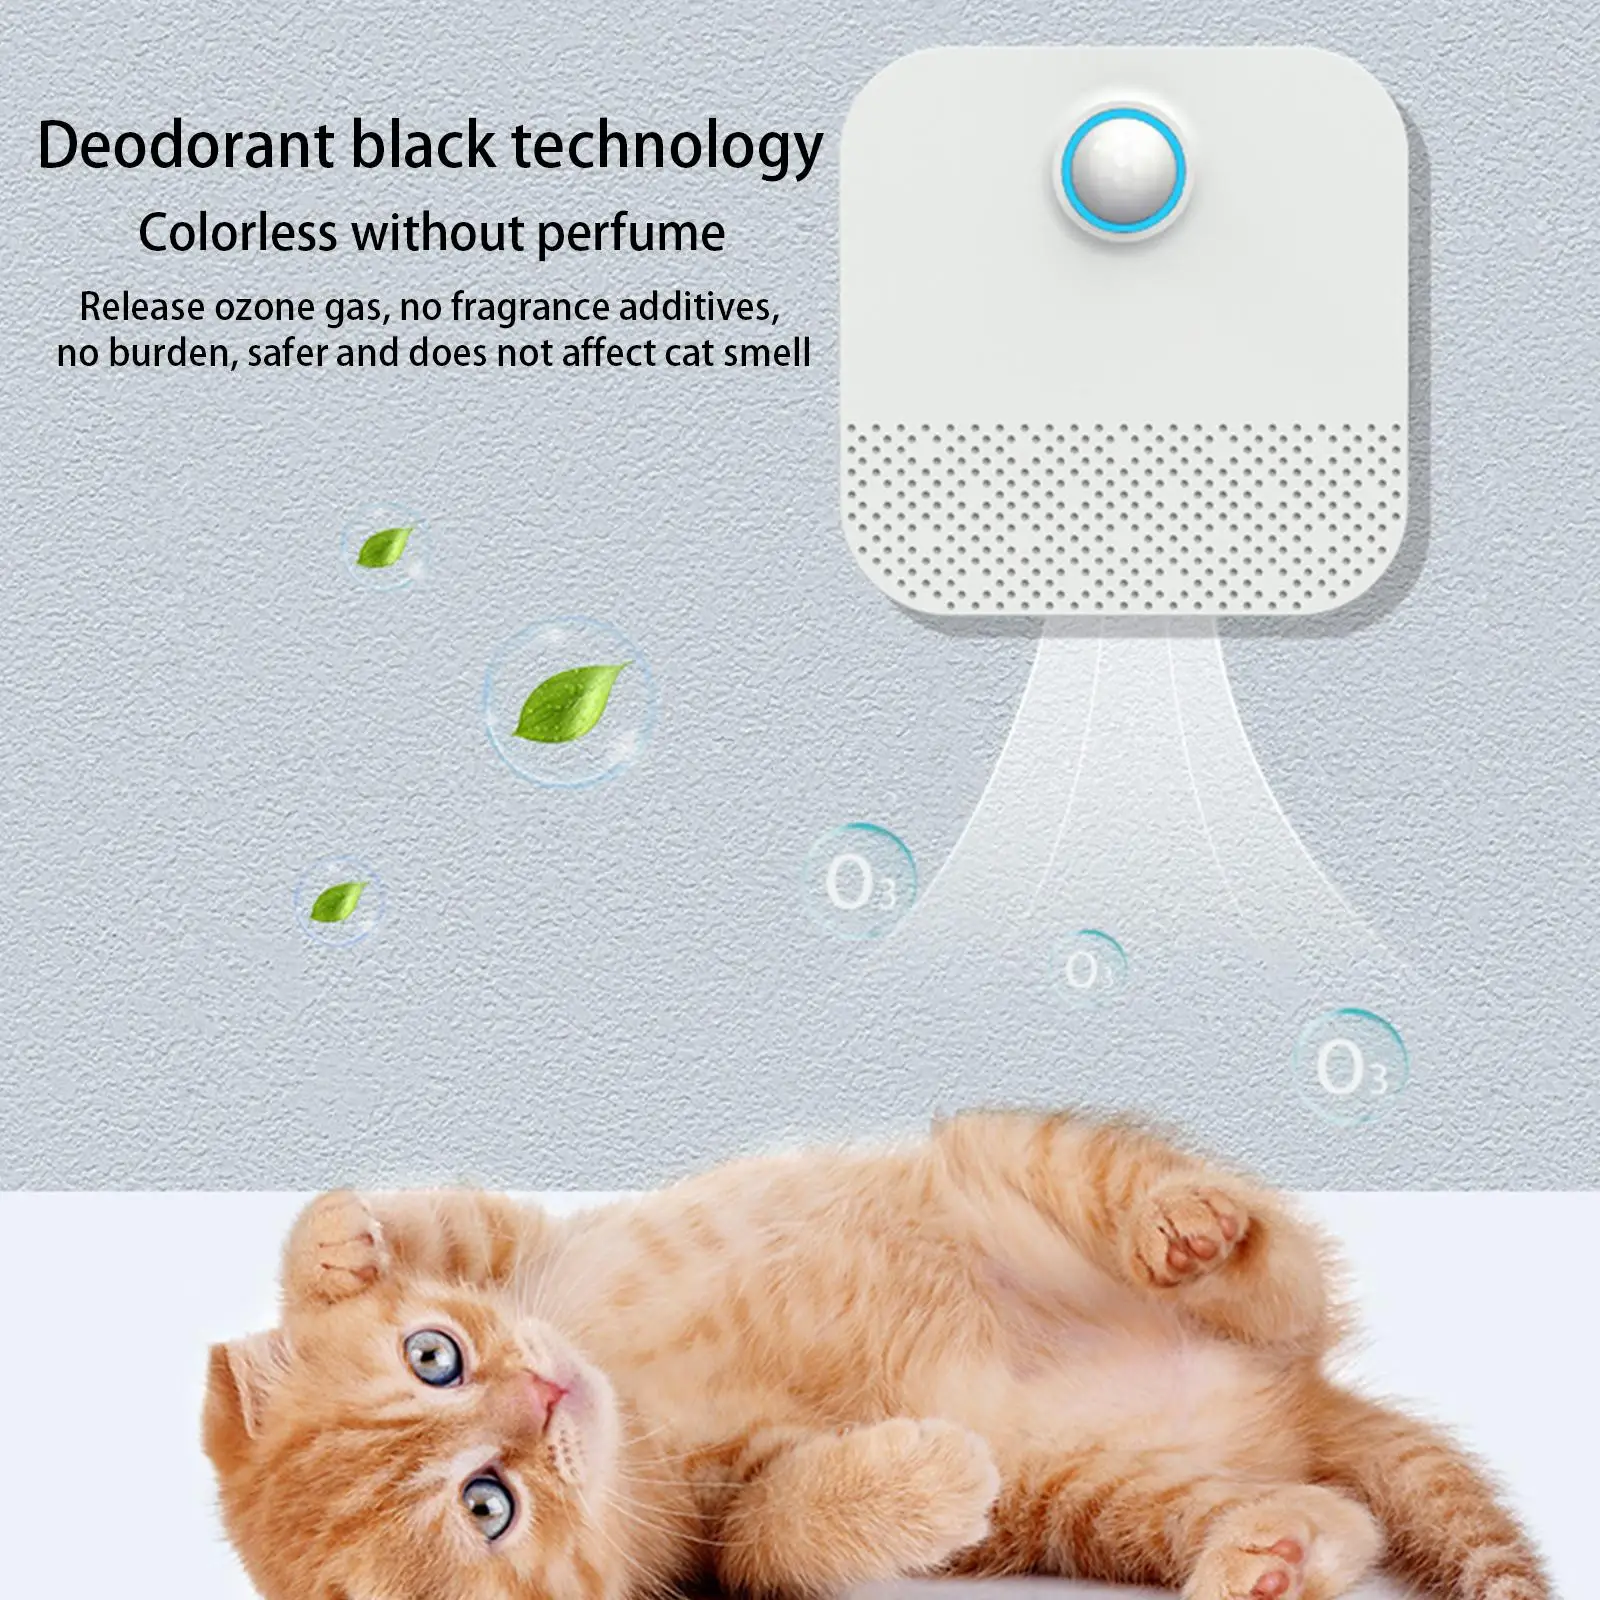 Cat Litter Deodorization Smell Remover Deodorization Unscented 15 Day Battery Life for Area